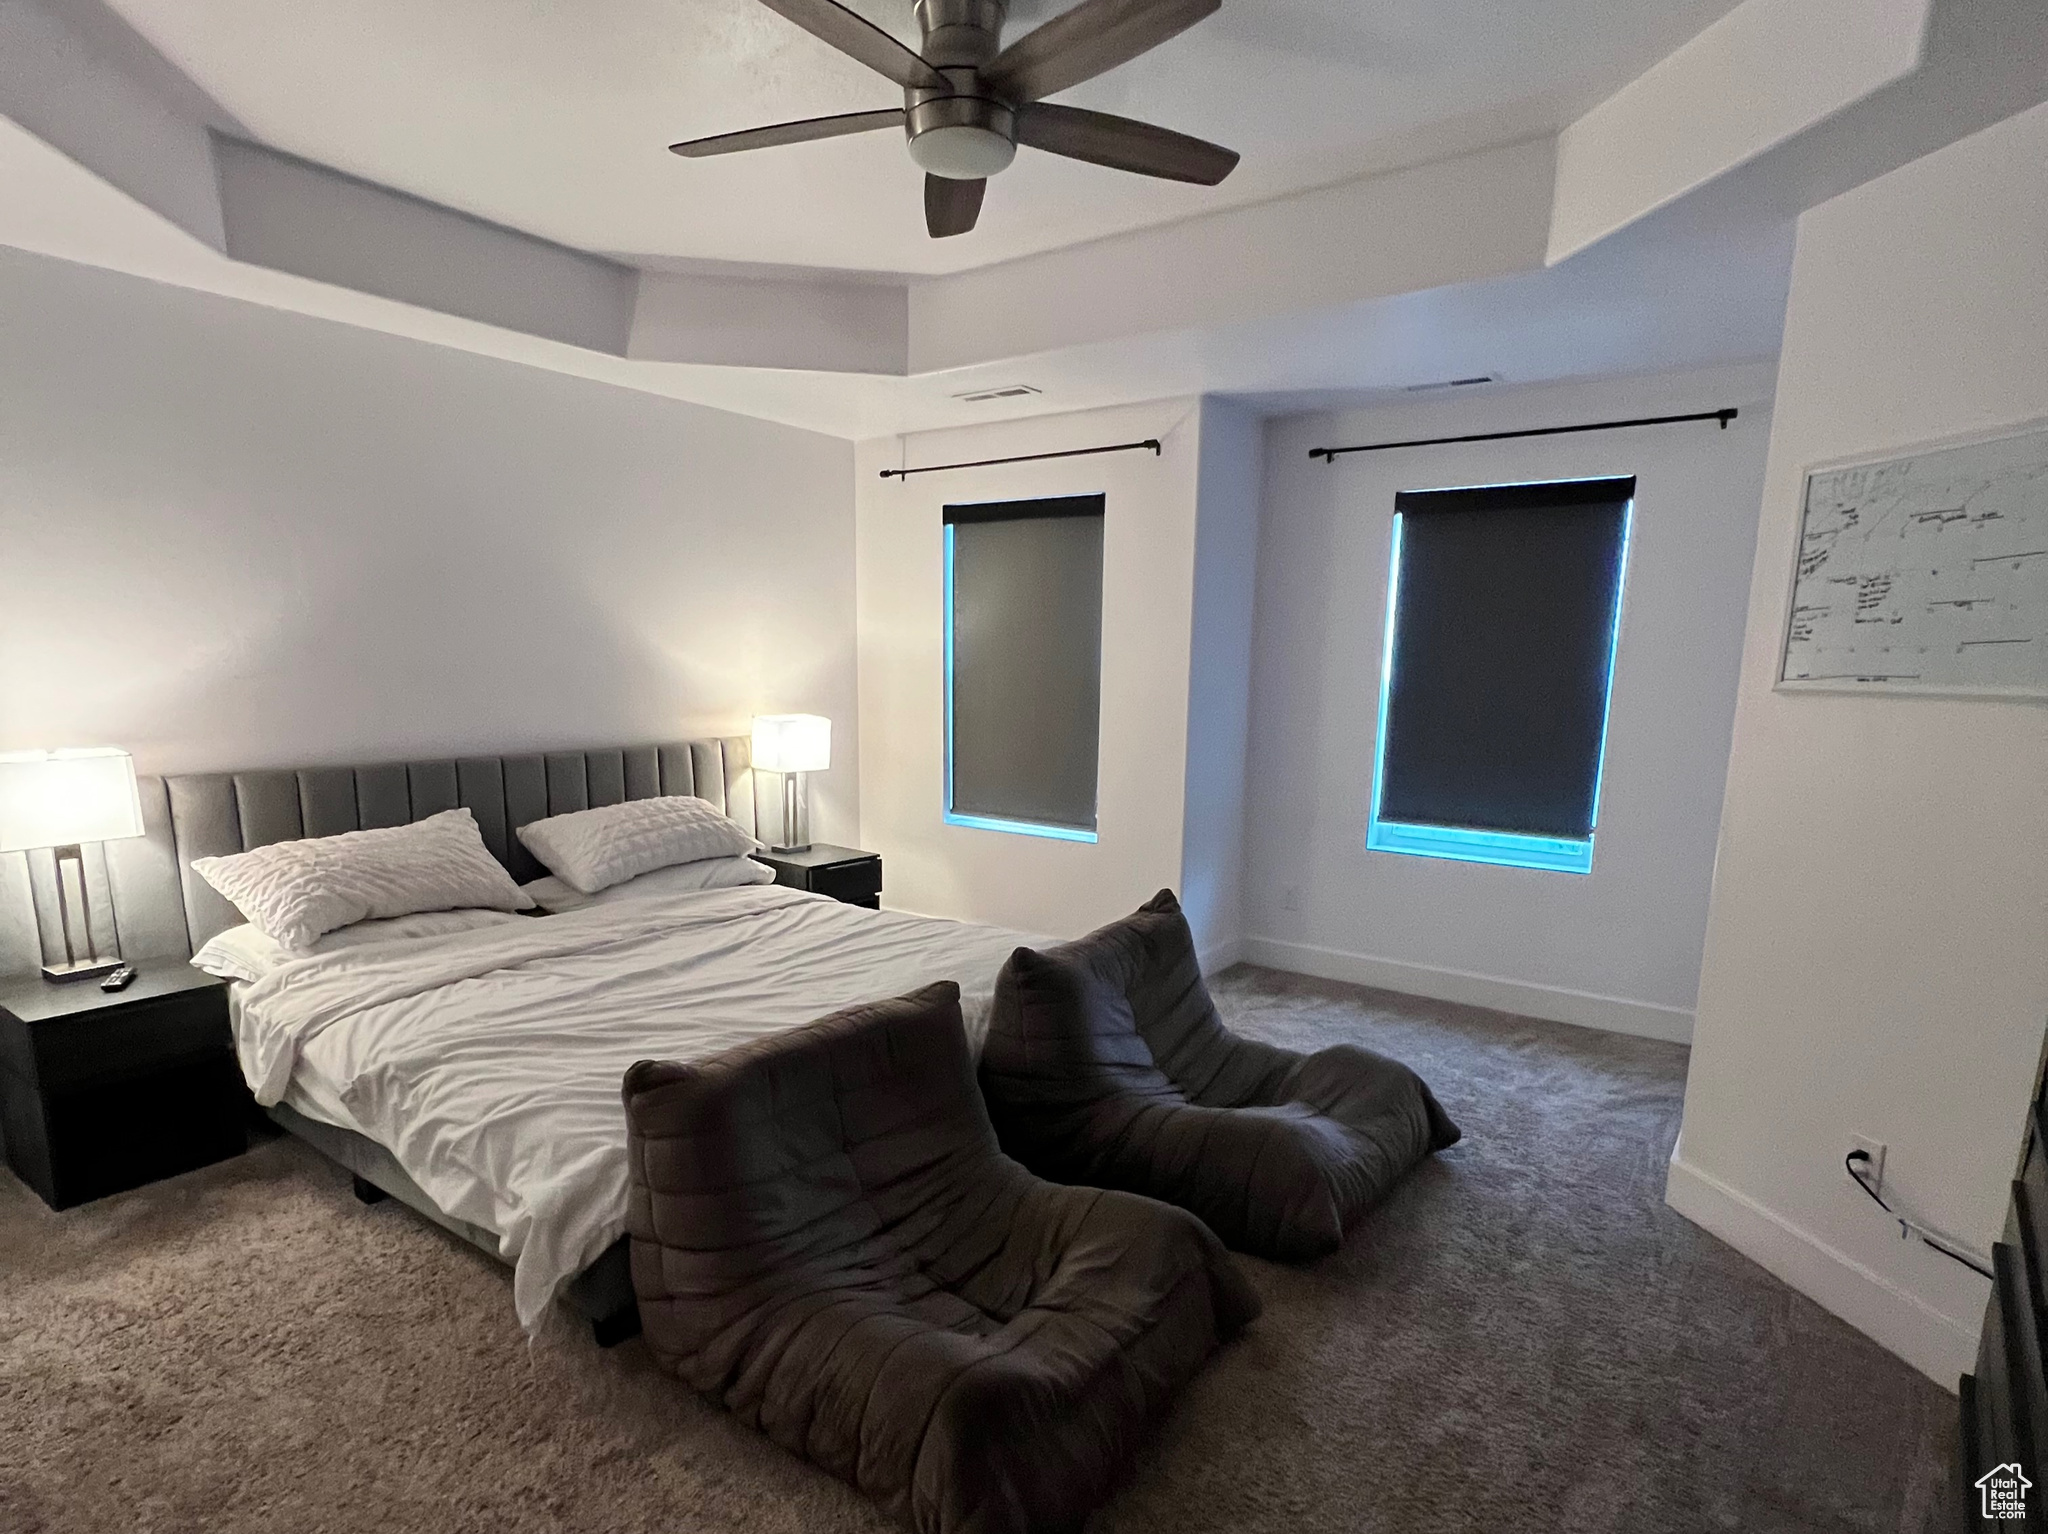 Carpeted bedroom featuring ceiling fan and a tray ceiling